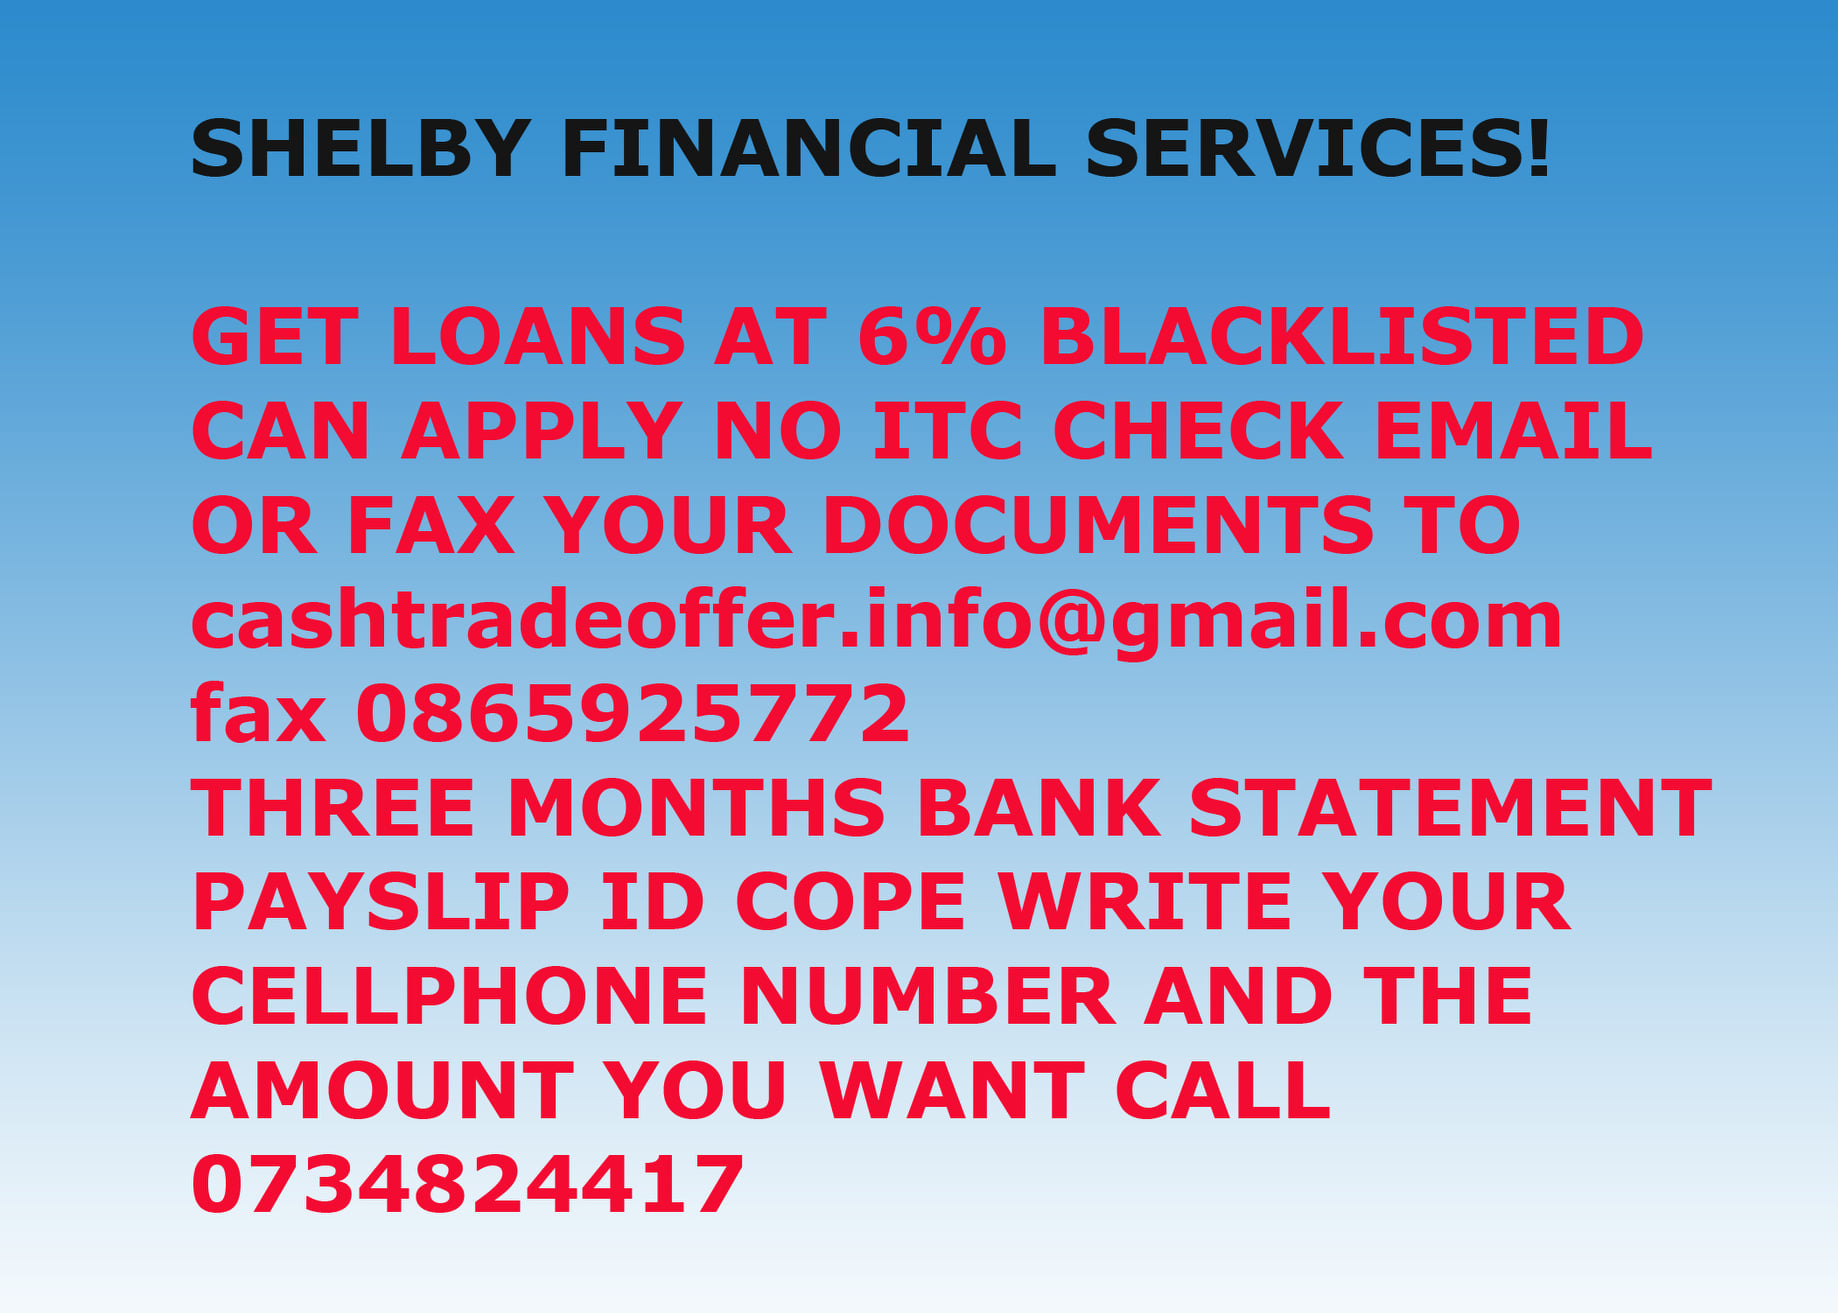 Shelby Financial Services 304 E 2nd Ave, Shelby Mississippi 38774